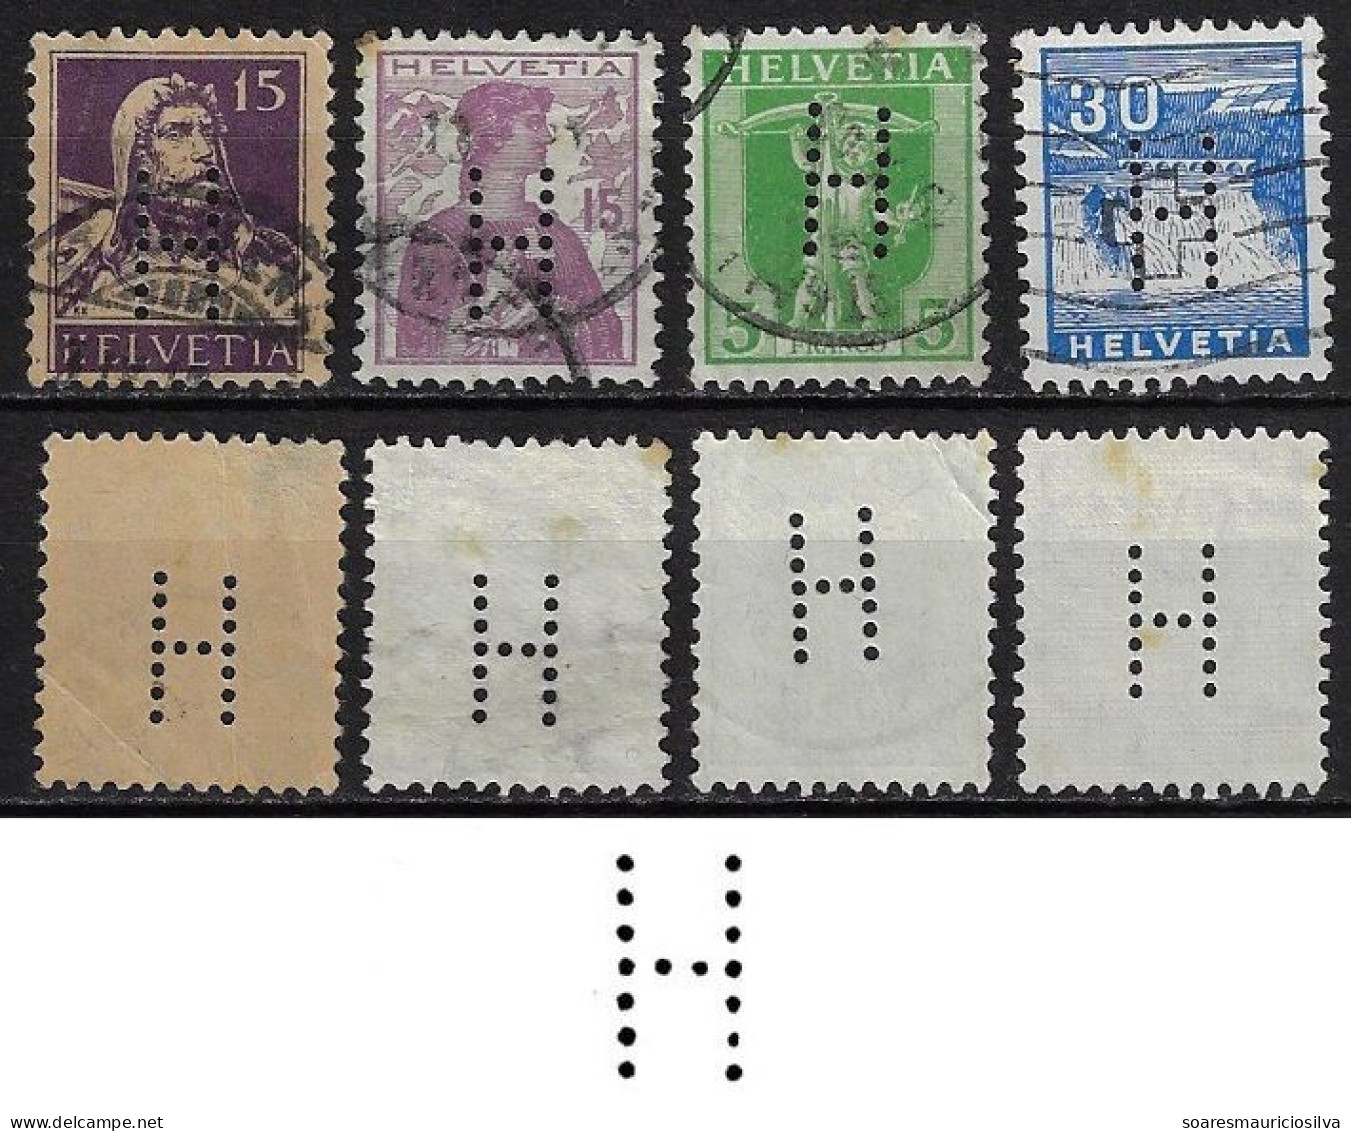 Switzerland 1901/1958 4 Stamp With Perfin H By Hausamann AG Plumbing Store In Zurich And St. Gallen Lochung Perfore - Perforadas